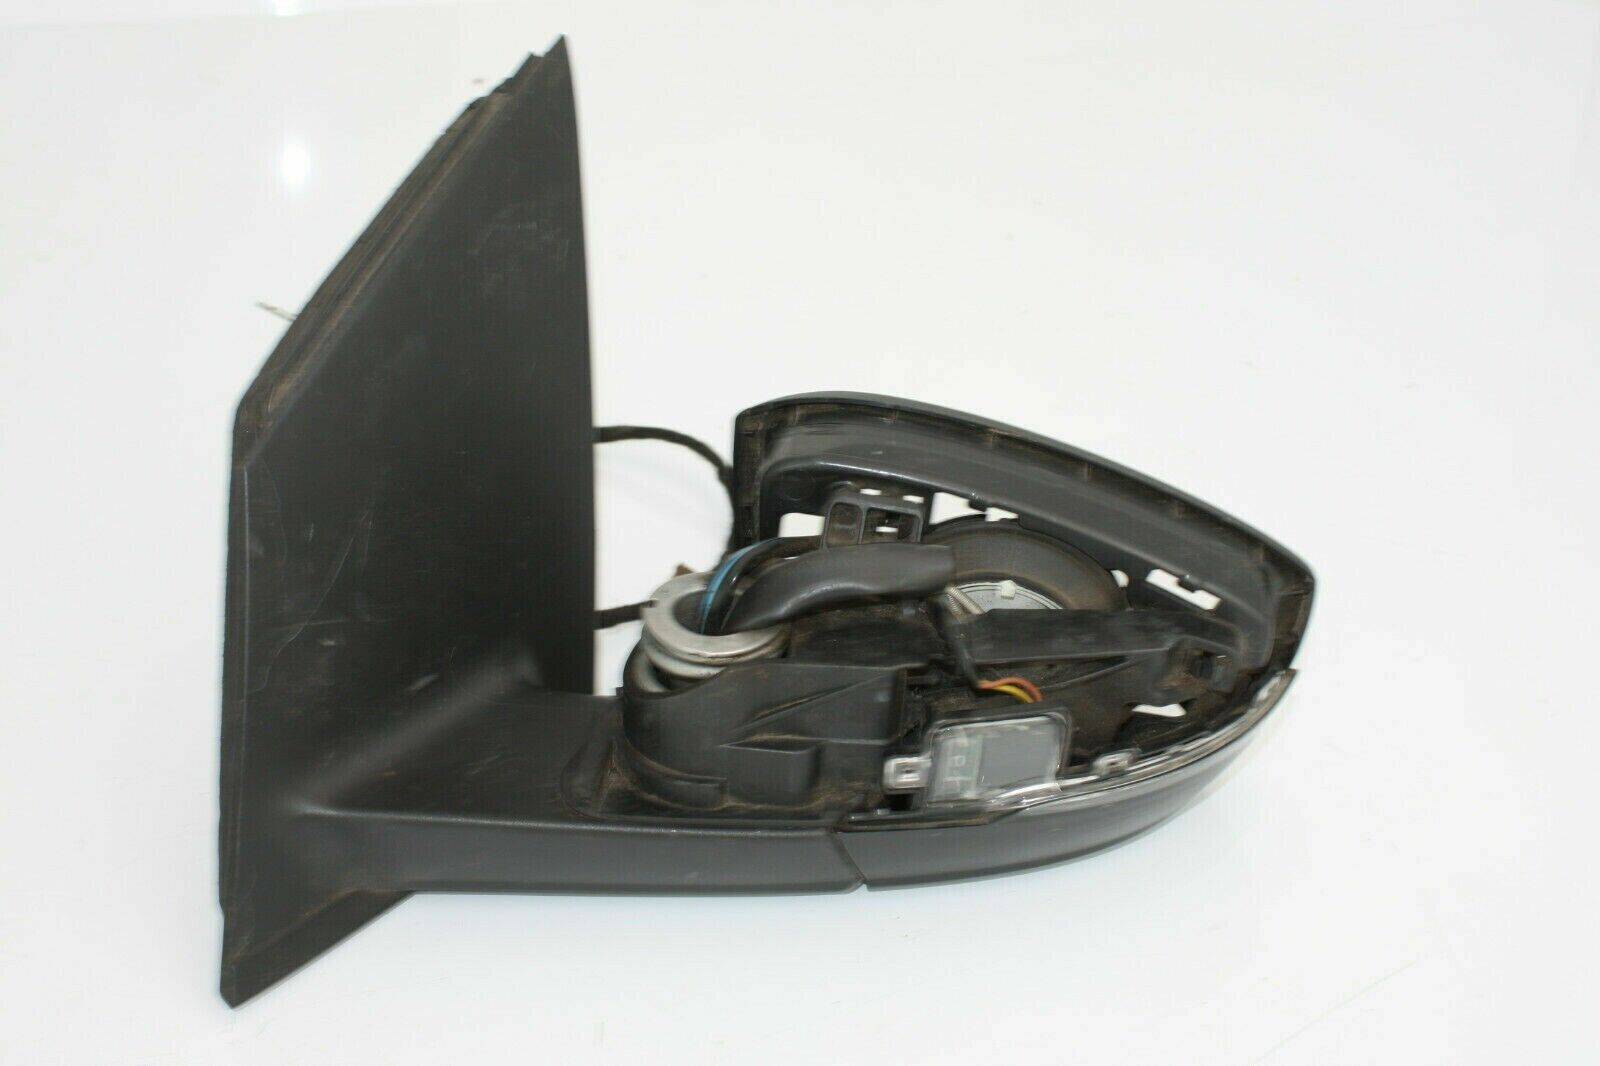 VOLKSWAGEN-POLO-WING-MIRROR-LEFT-2009-TO-2014-175421234513-4